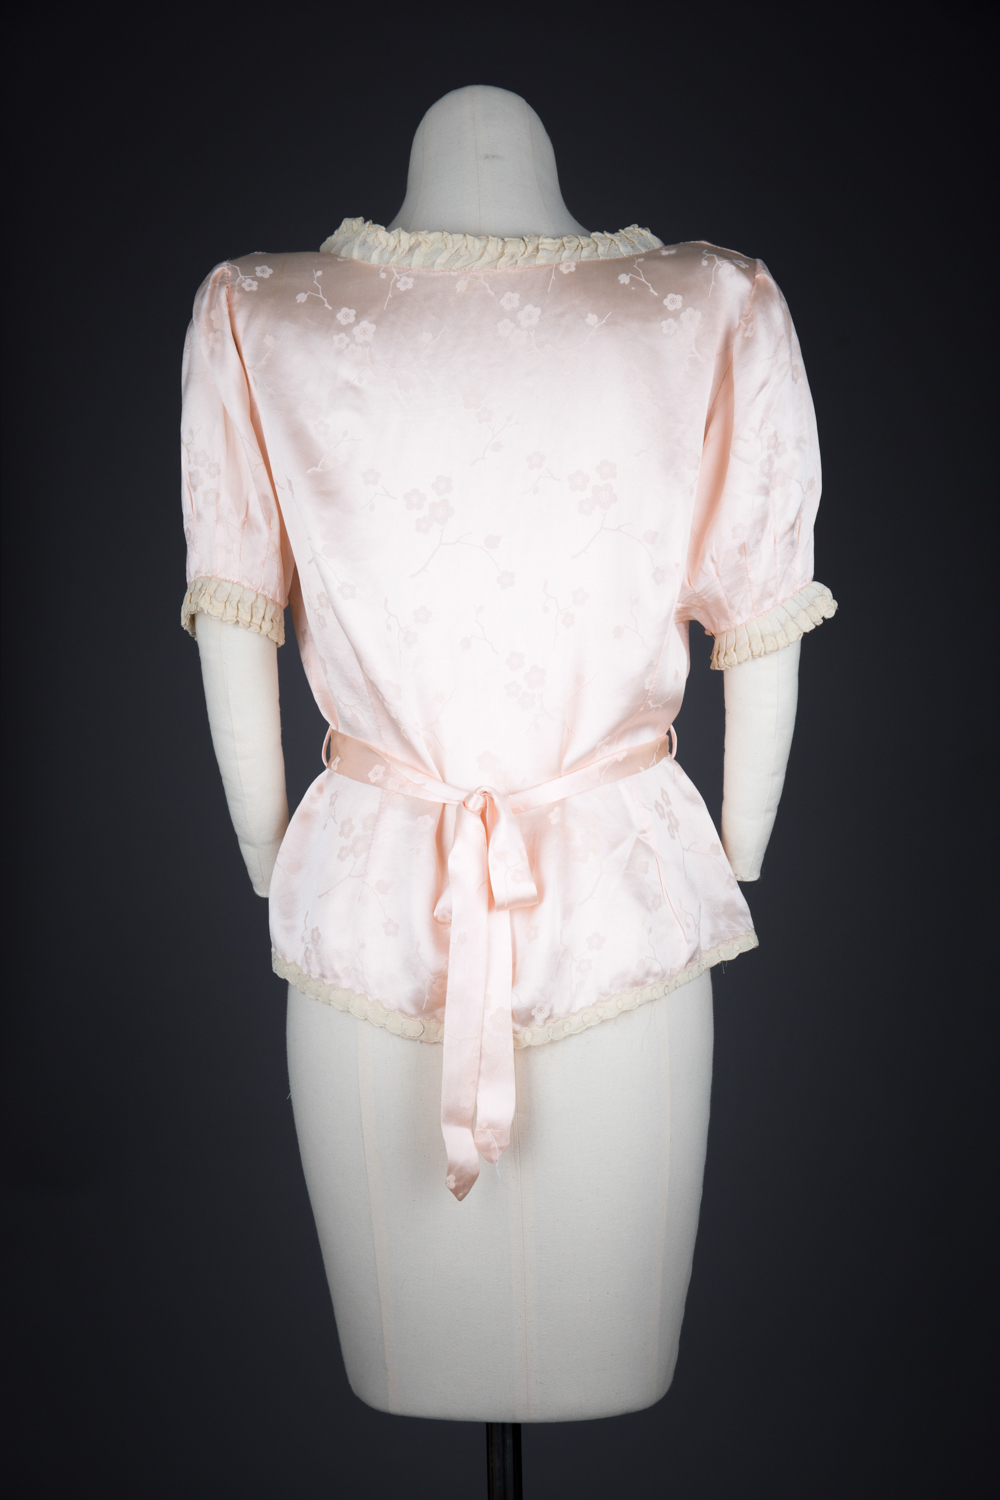 Jacquard Weave Cherry Blossom Silk Bed Jacket With Appliqué & Frog Fastenings, c. 1940s, Made in China for the USA market. The Underpinnings Museum. Photography by Tigz Rice.